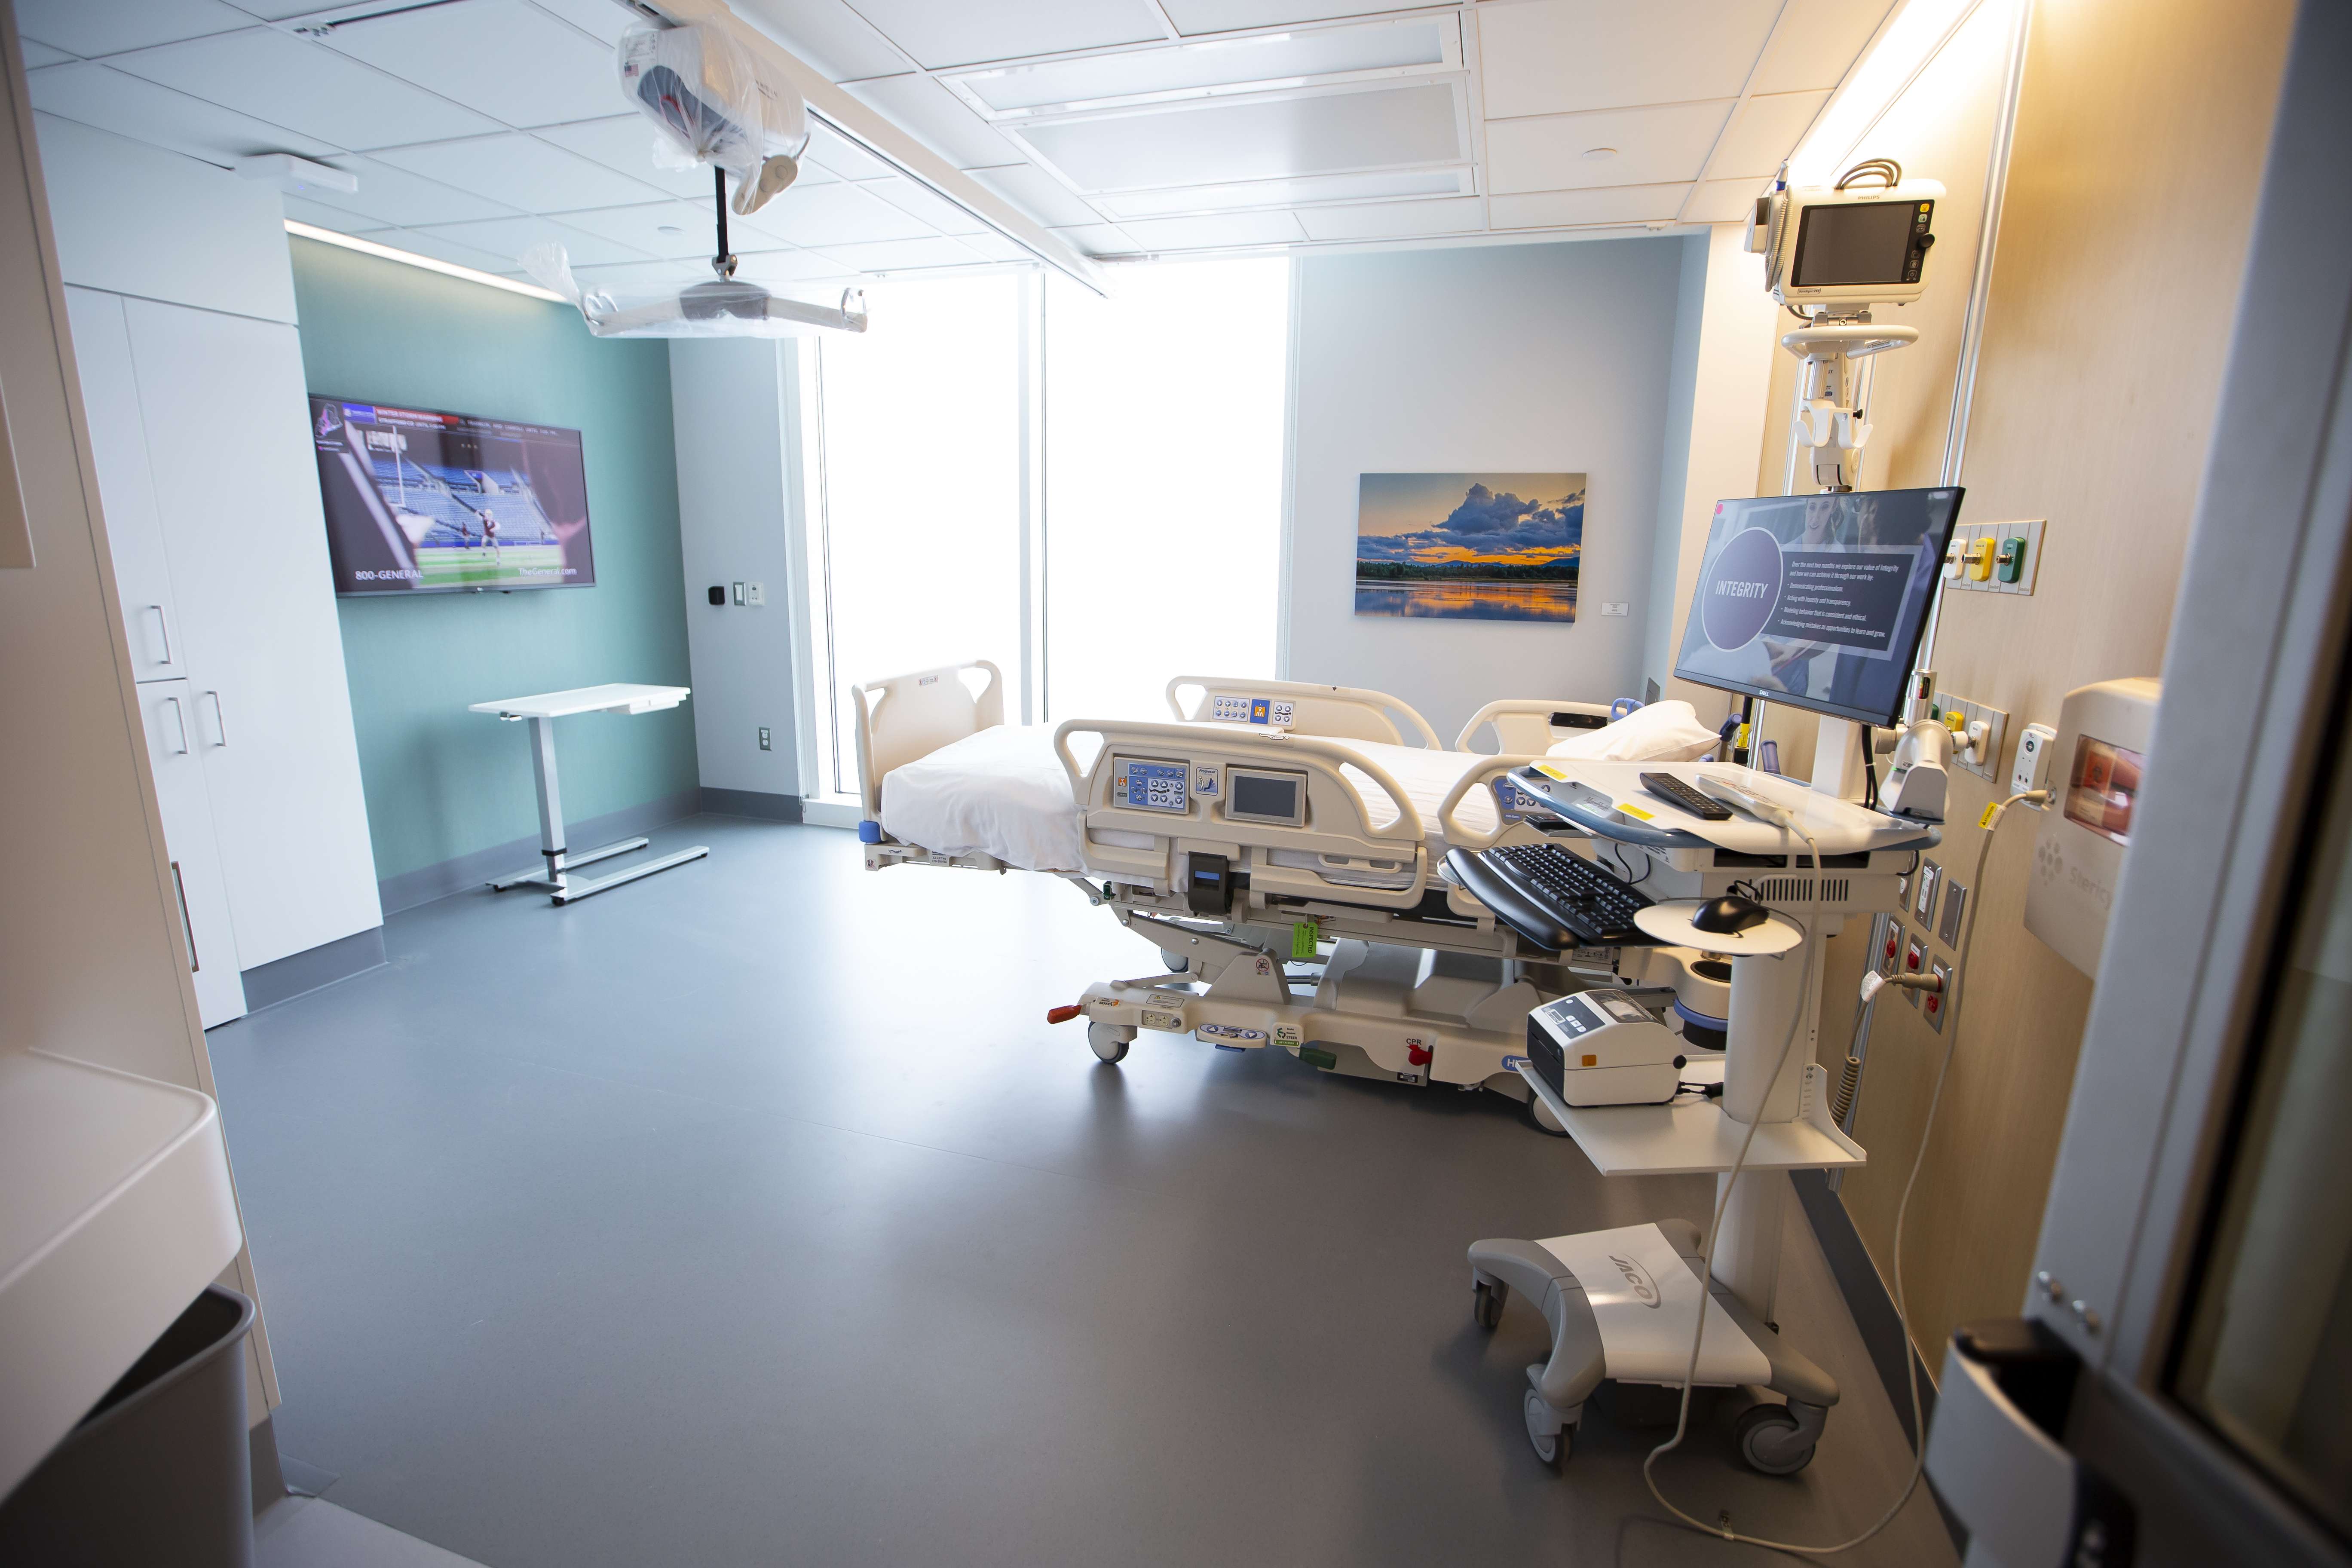 Example of new oncology room at Maine Medical Center